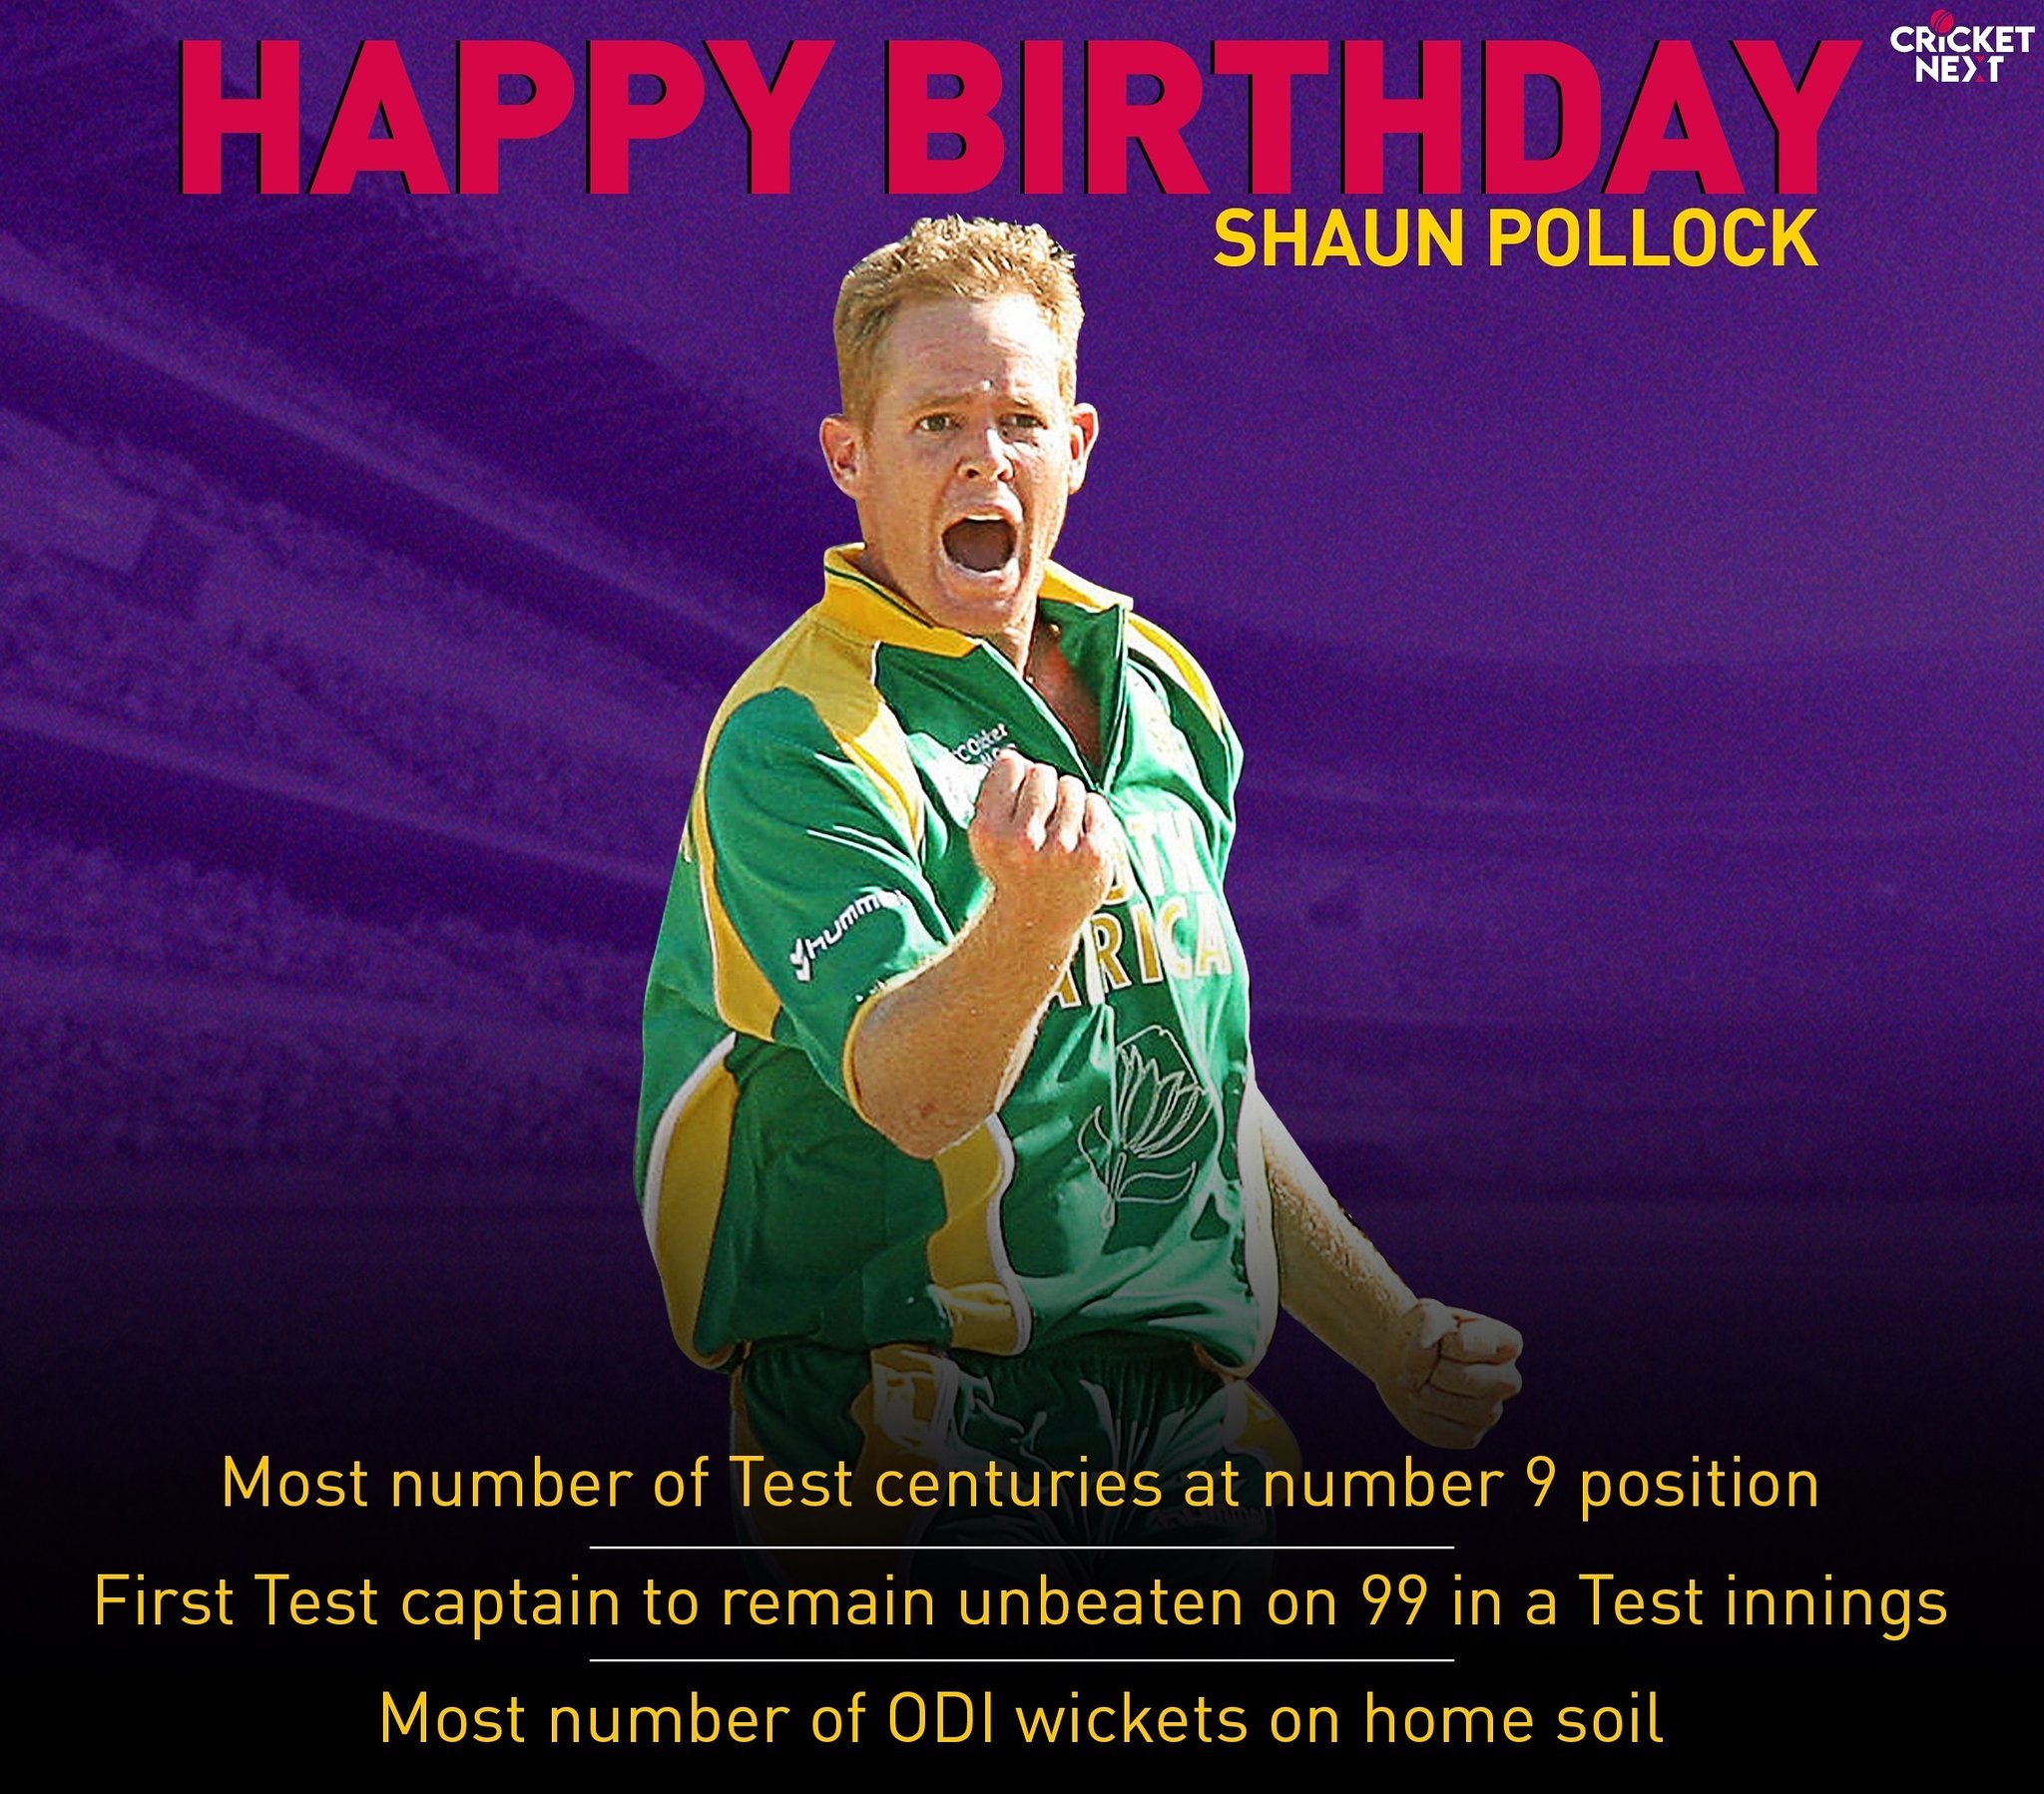 Here\s wishing one of South Africa\s greatest ever cricketers, Shaun Pollock, a very happy birthday 